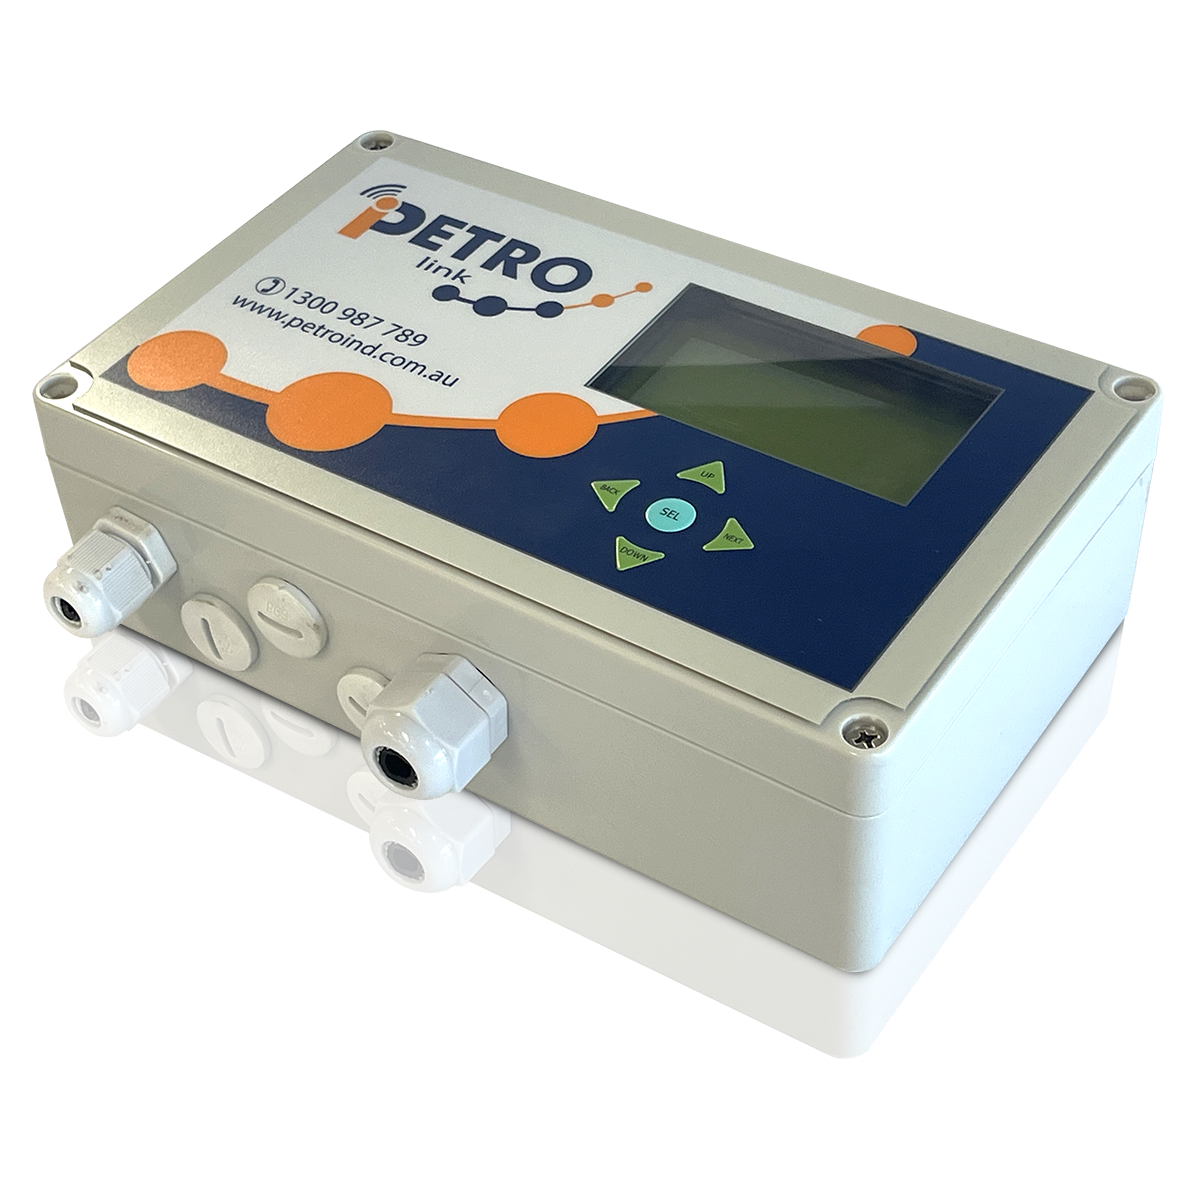 iPETRO Link-Gauging Communication device for any Fuel Management system